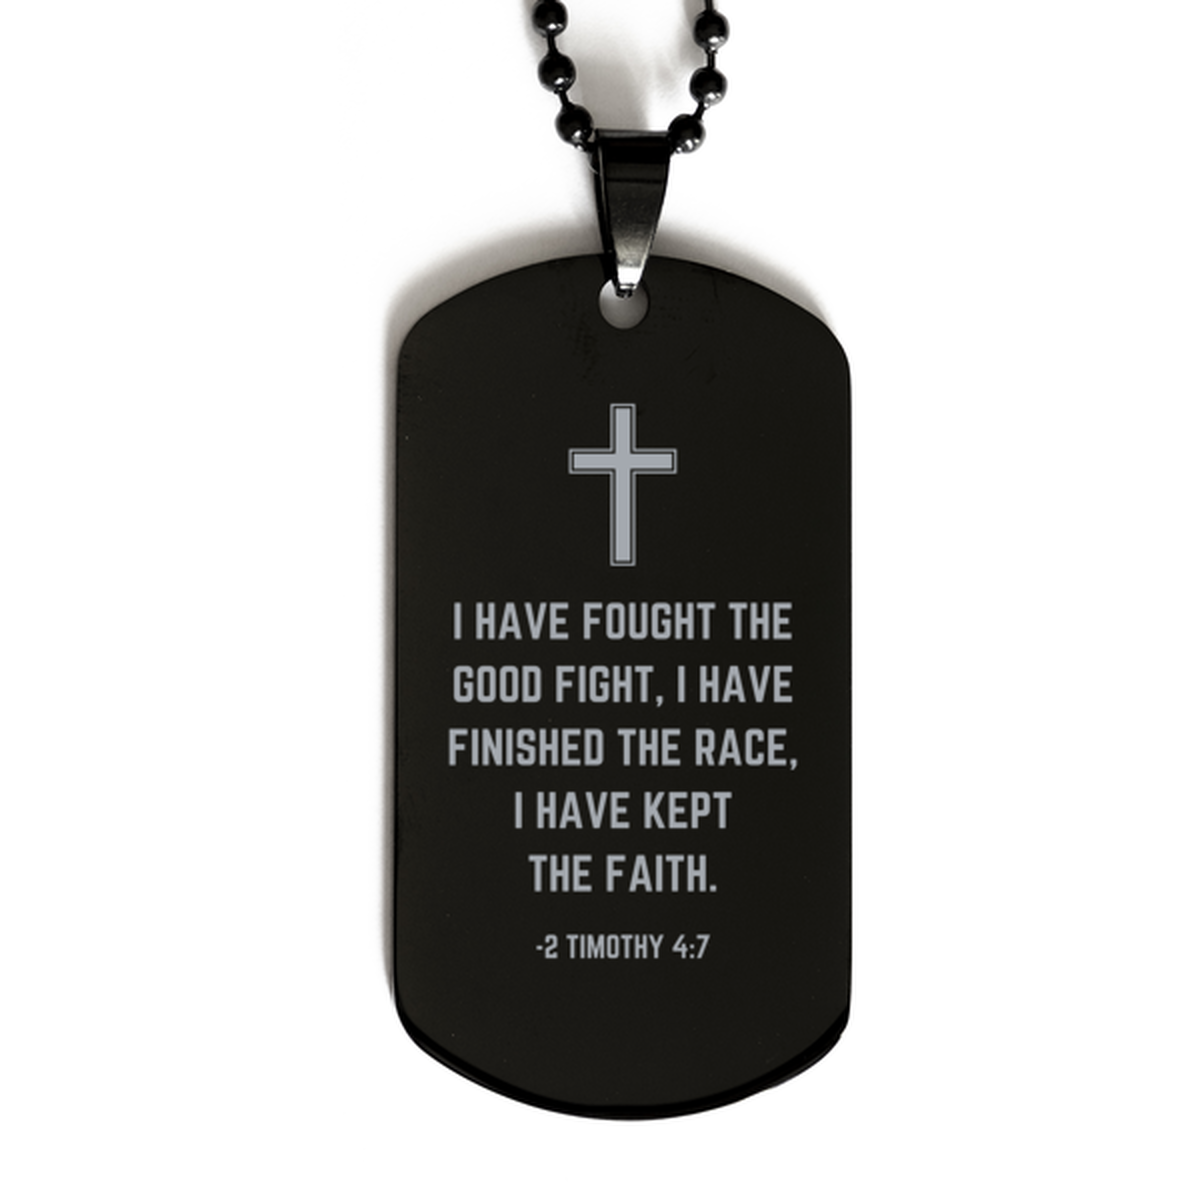 Baptism Gifts For Teenage Boys Girls, Christian Bible Verse Black Dog Tag, I have fought the good fight, Confirmation Gifts, Bible Verse Necklace for Son, Godson, Grandson, Nephew